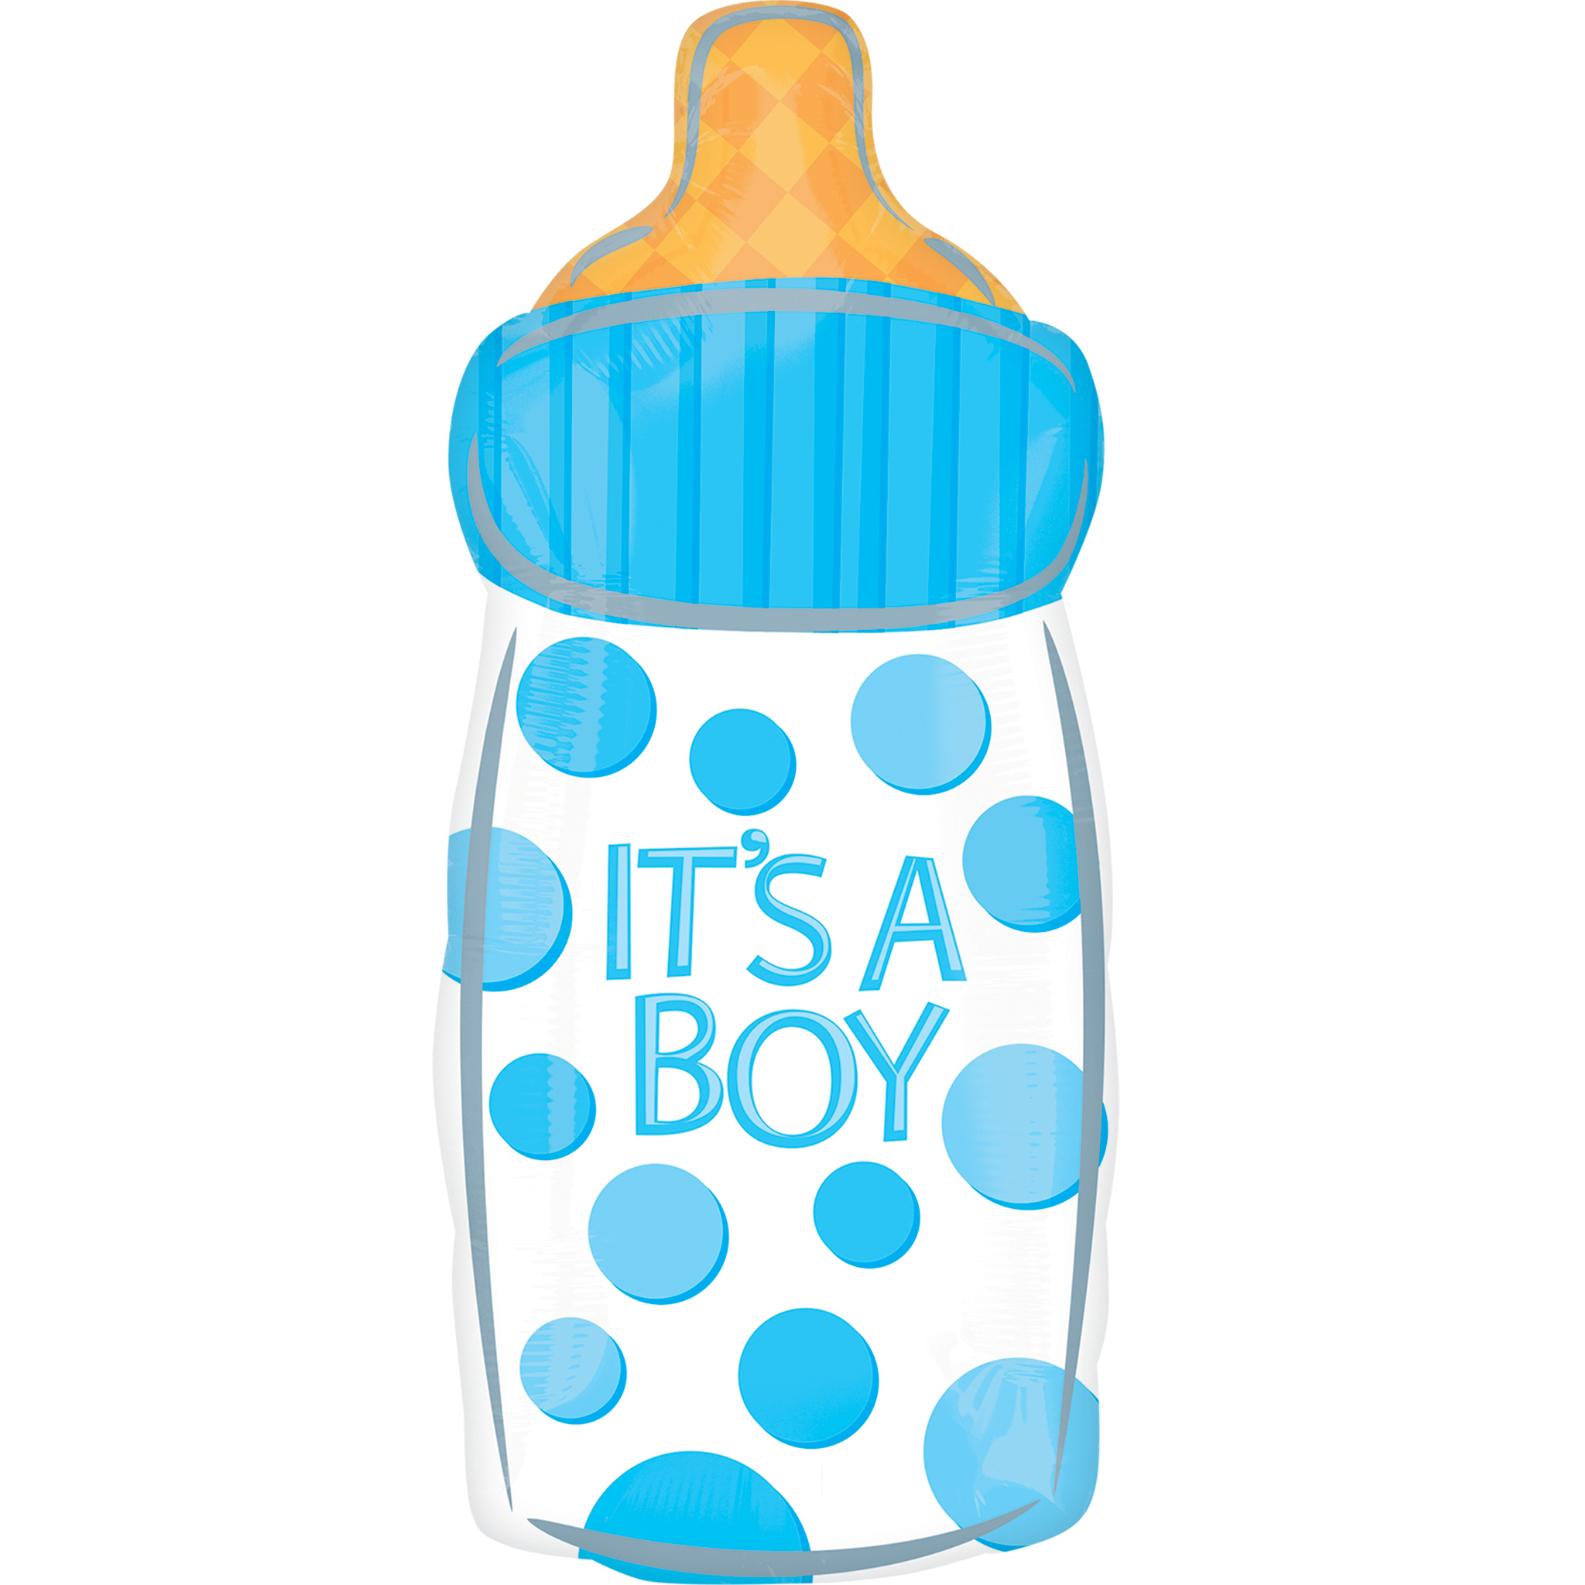 It's A Boy Baby Bottle Junior Shape Foil Balloon Balloons & Streamers - Party Centre